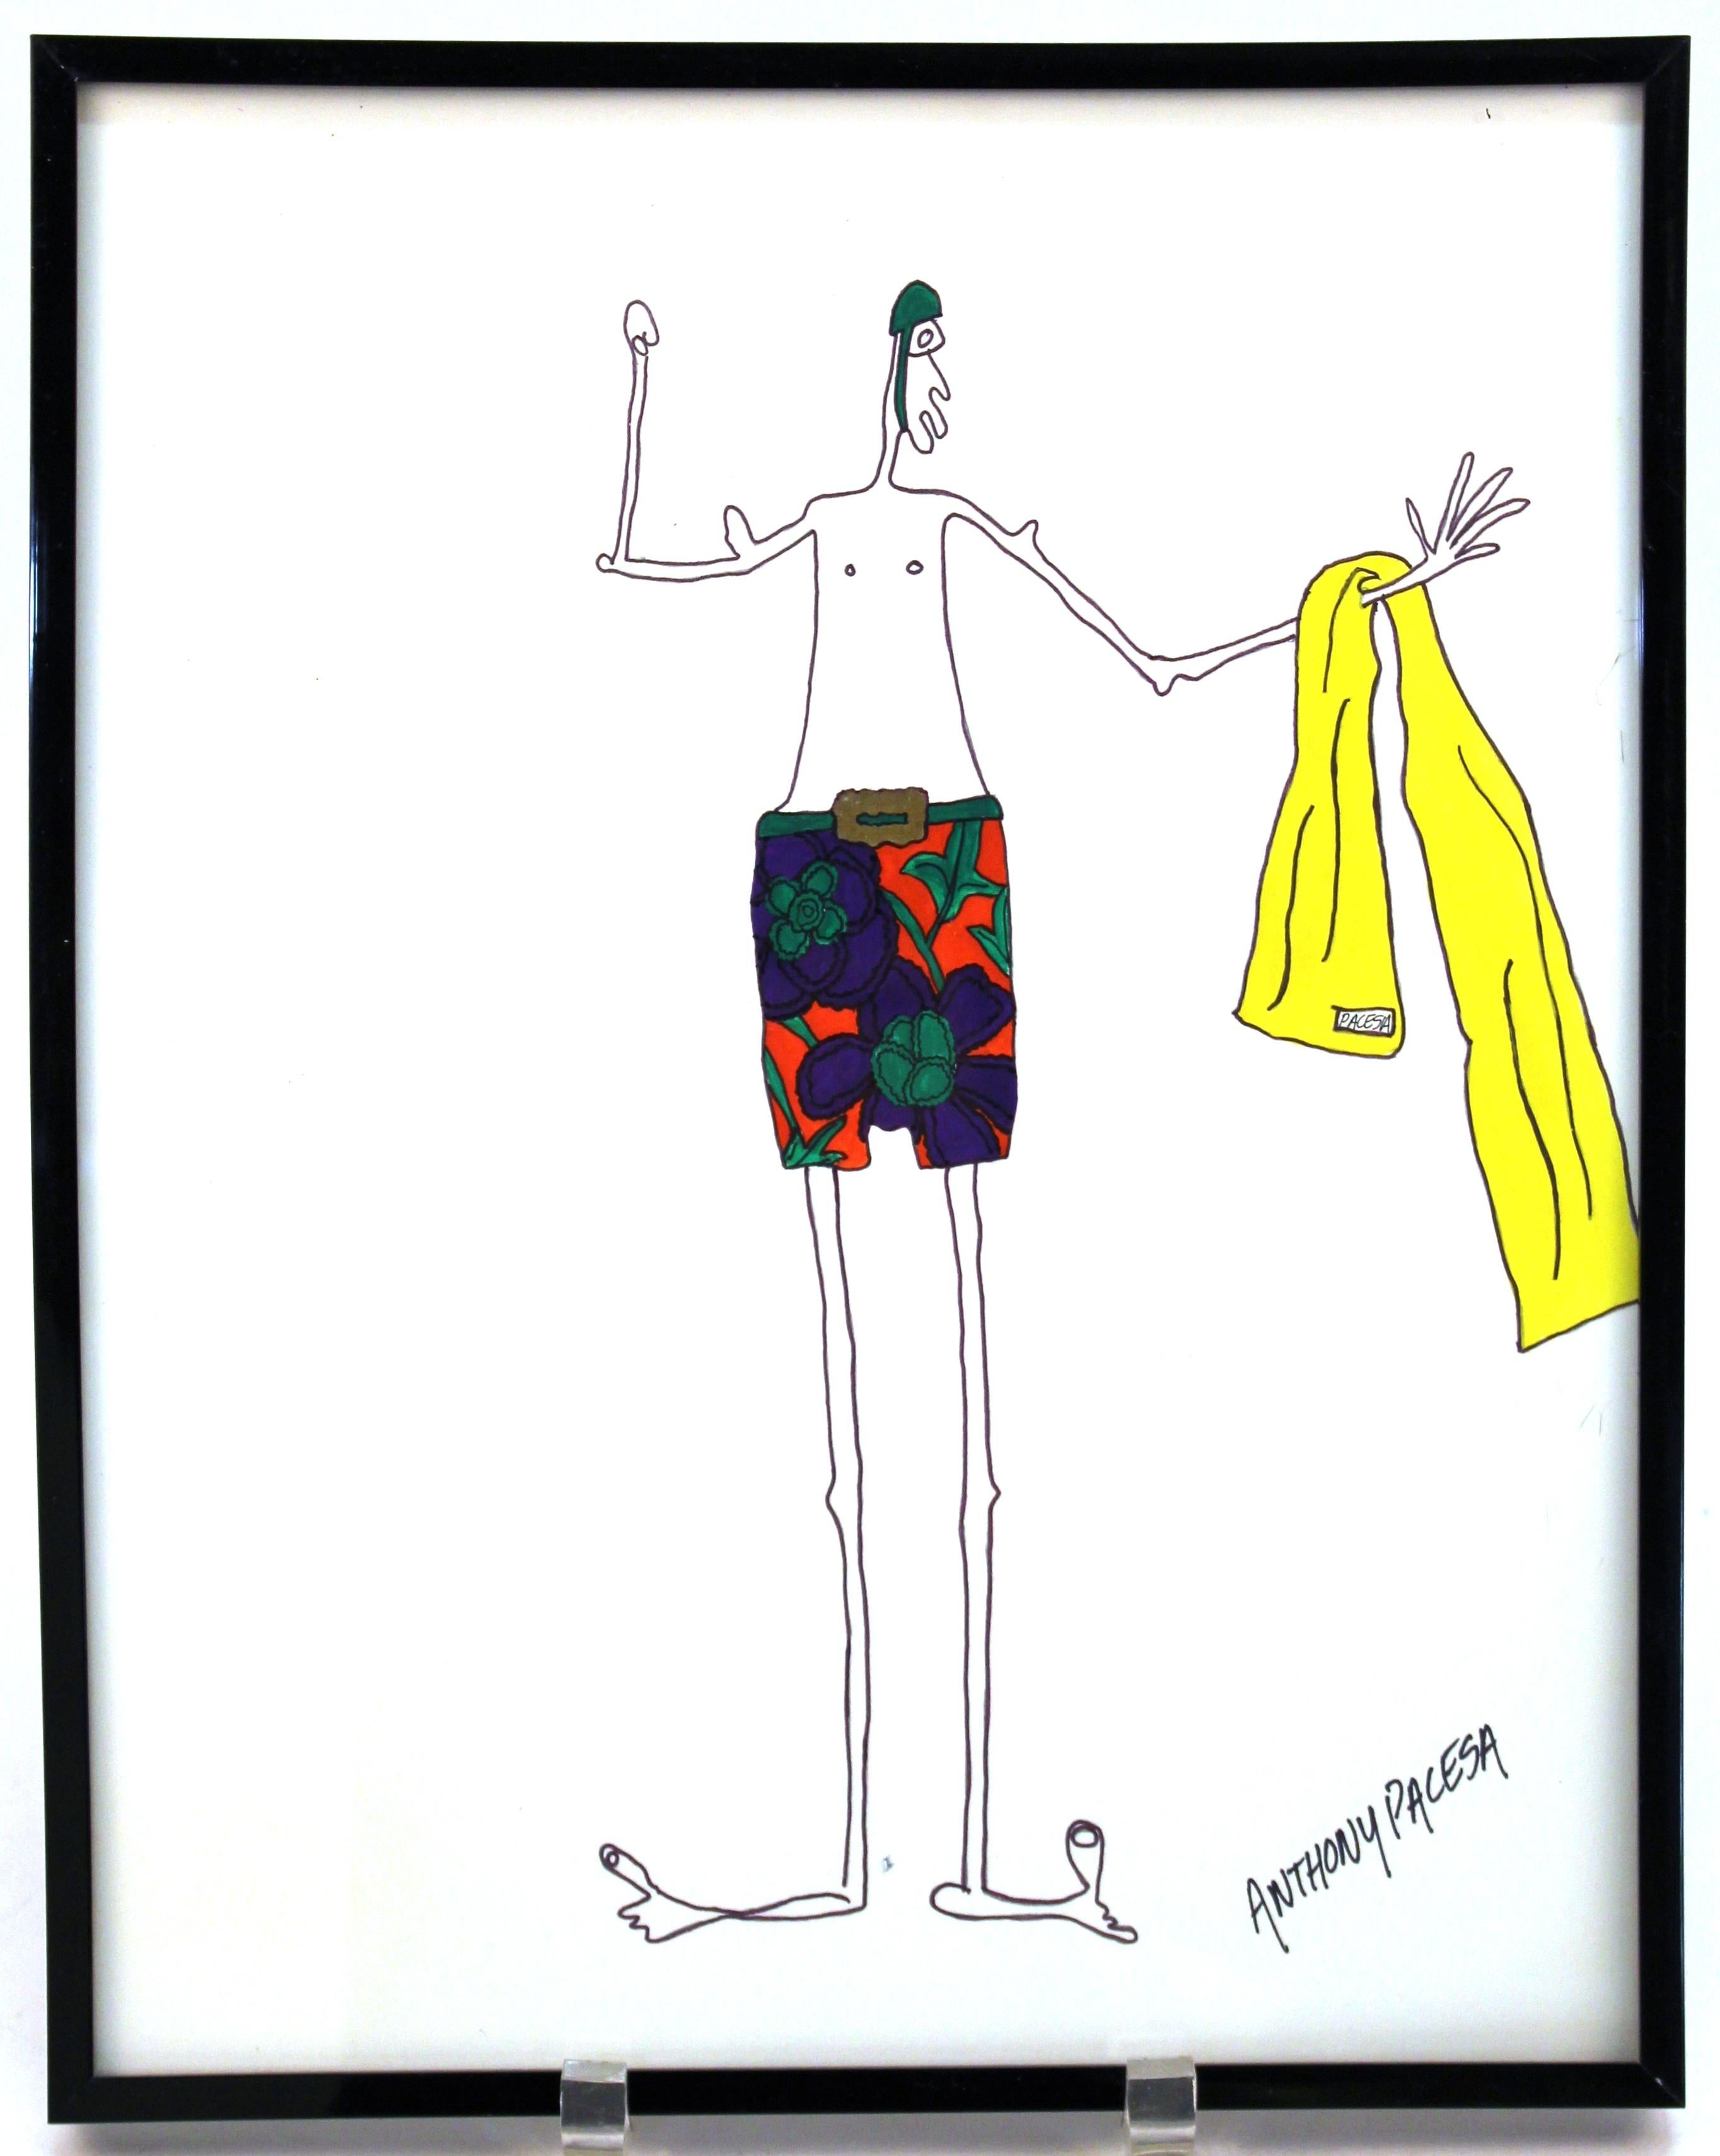 Set of twenty Postmodernist fashion design sketches or illustrations, drawn with marker pens and watercolors by Anthony Pacesa. The set was made during the 1980s in the United States. Some of the images have sample fabrics drawn in with the